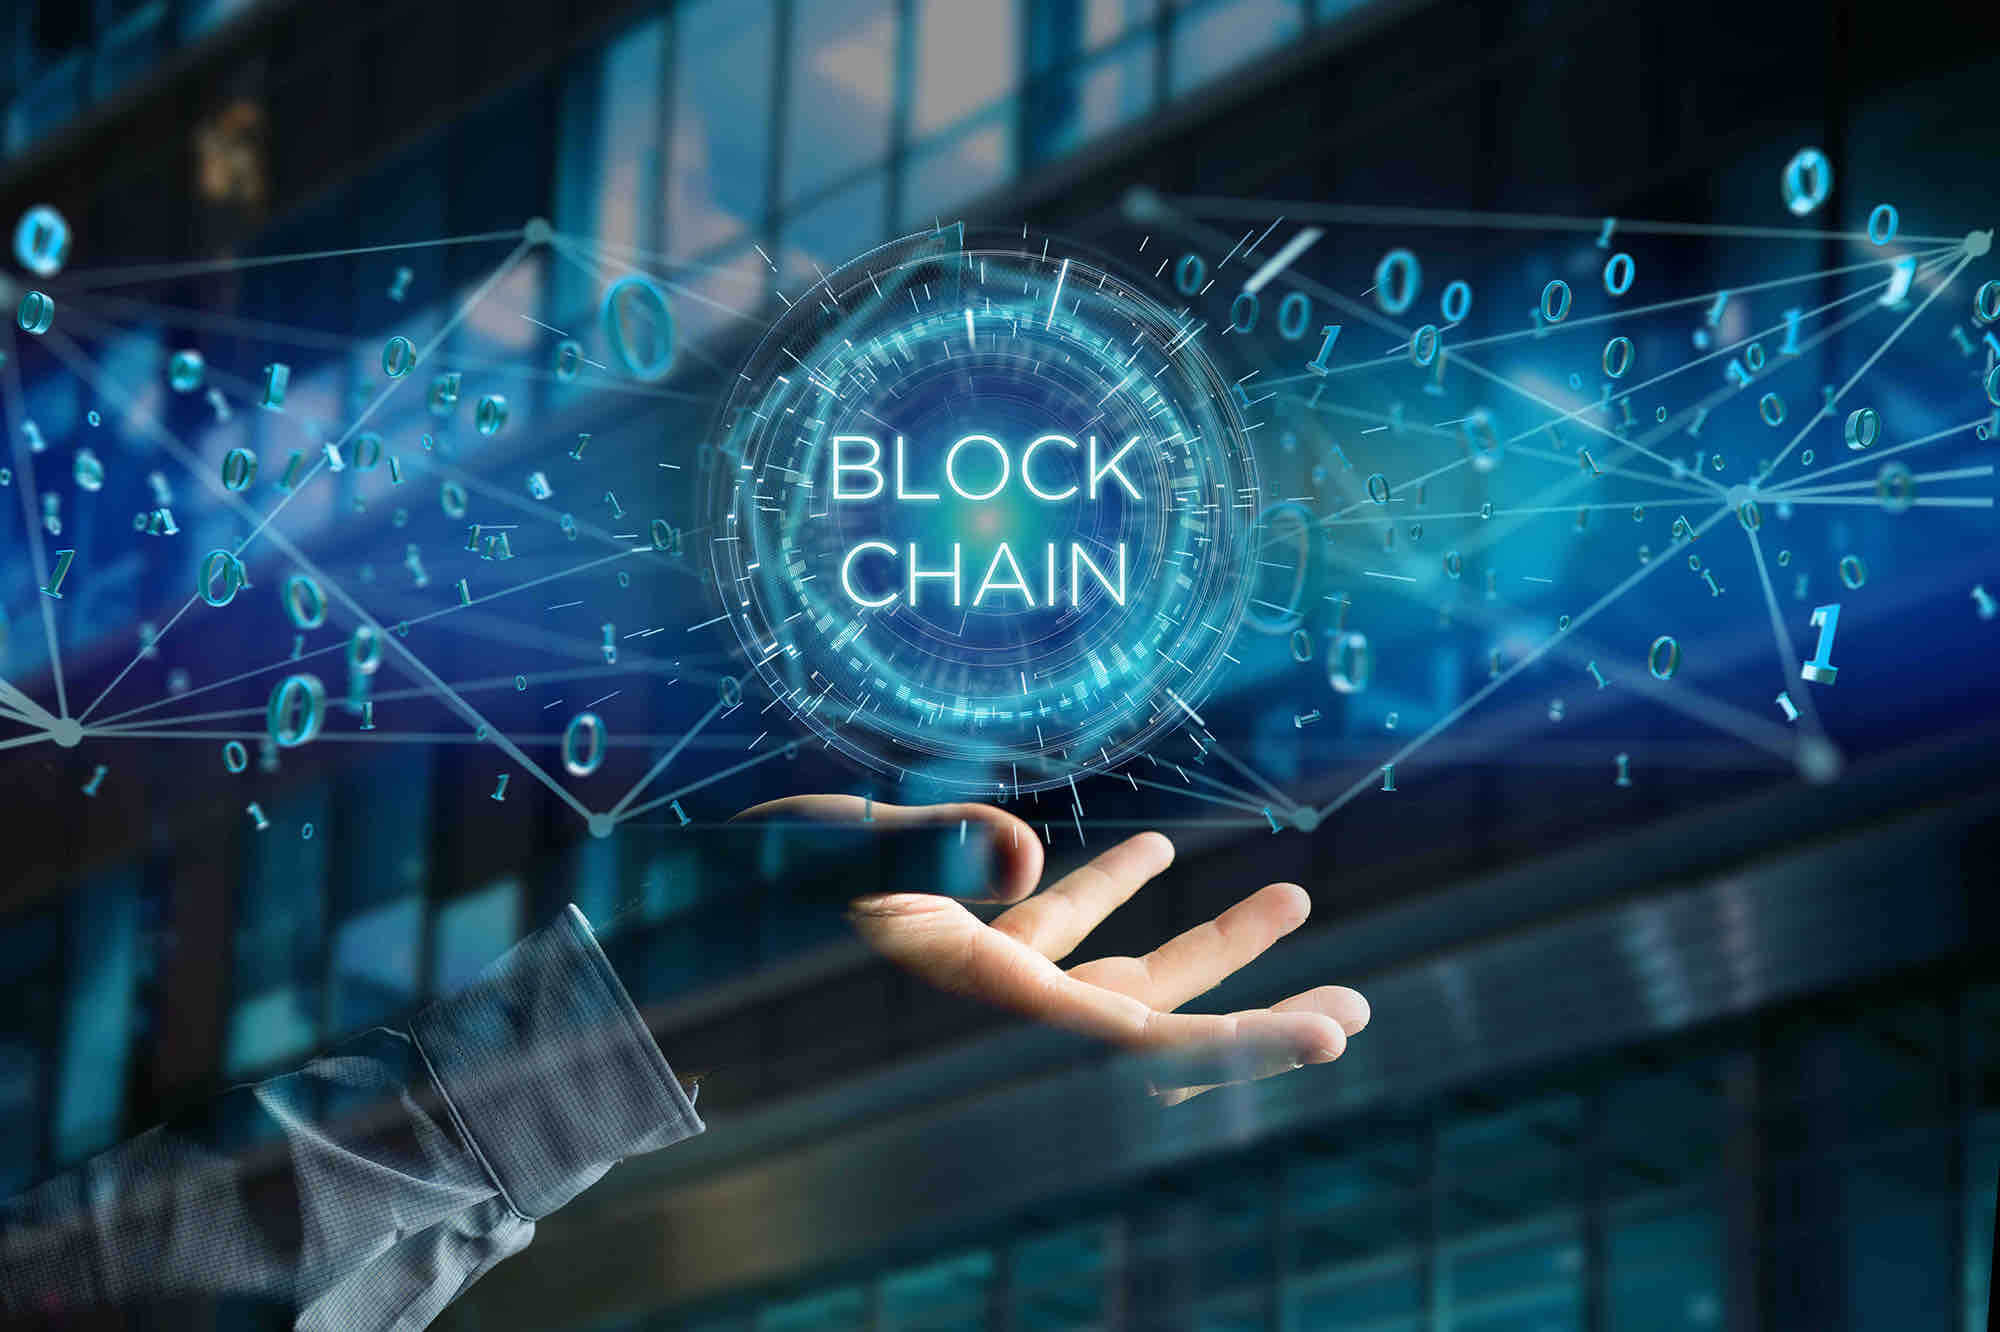 Blockchain technology in Africa's supply chains